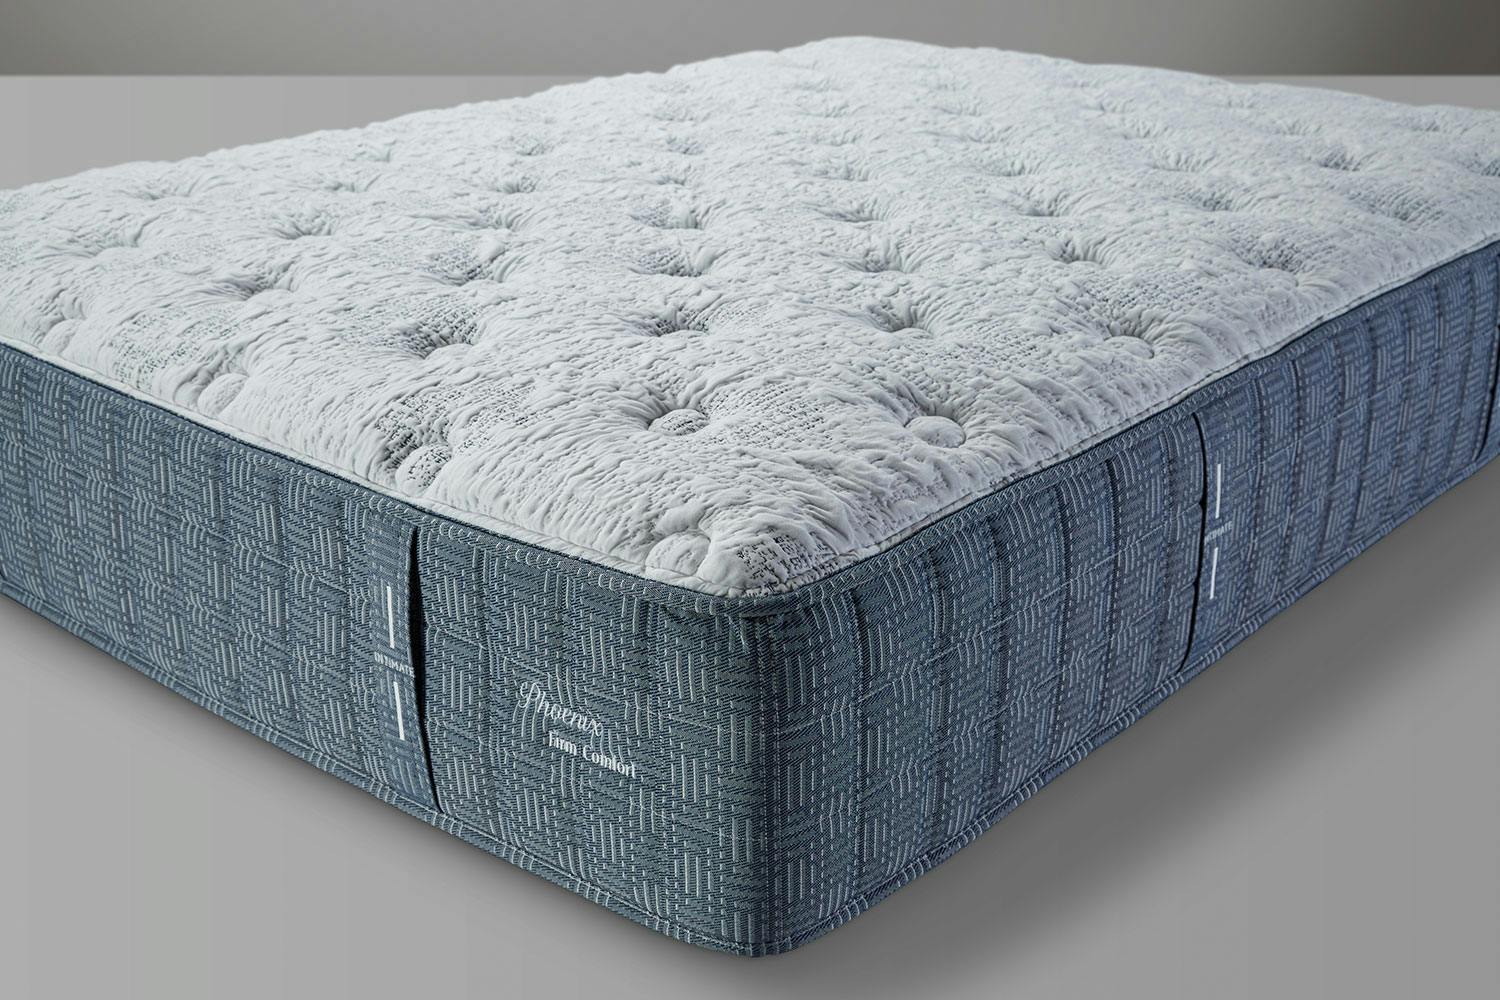 firm double mattress for back pain